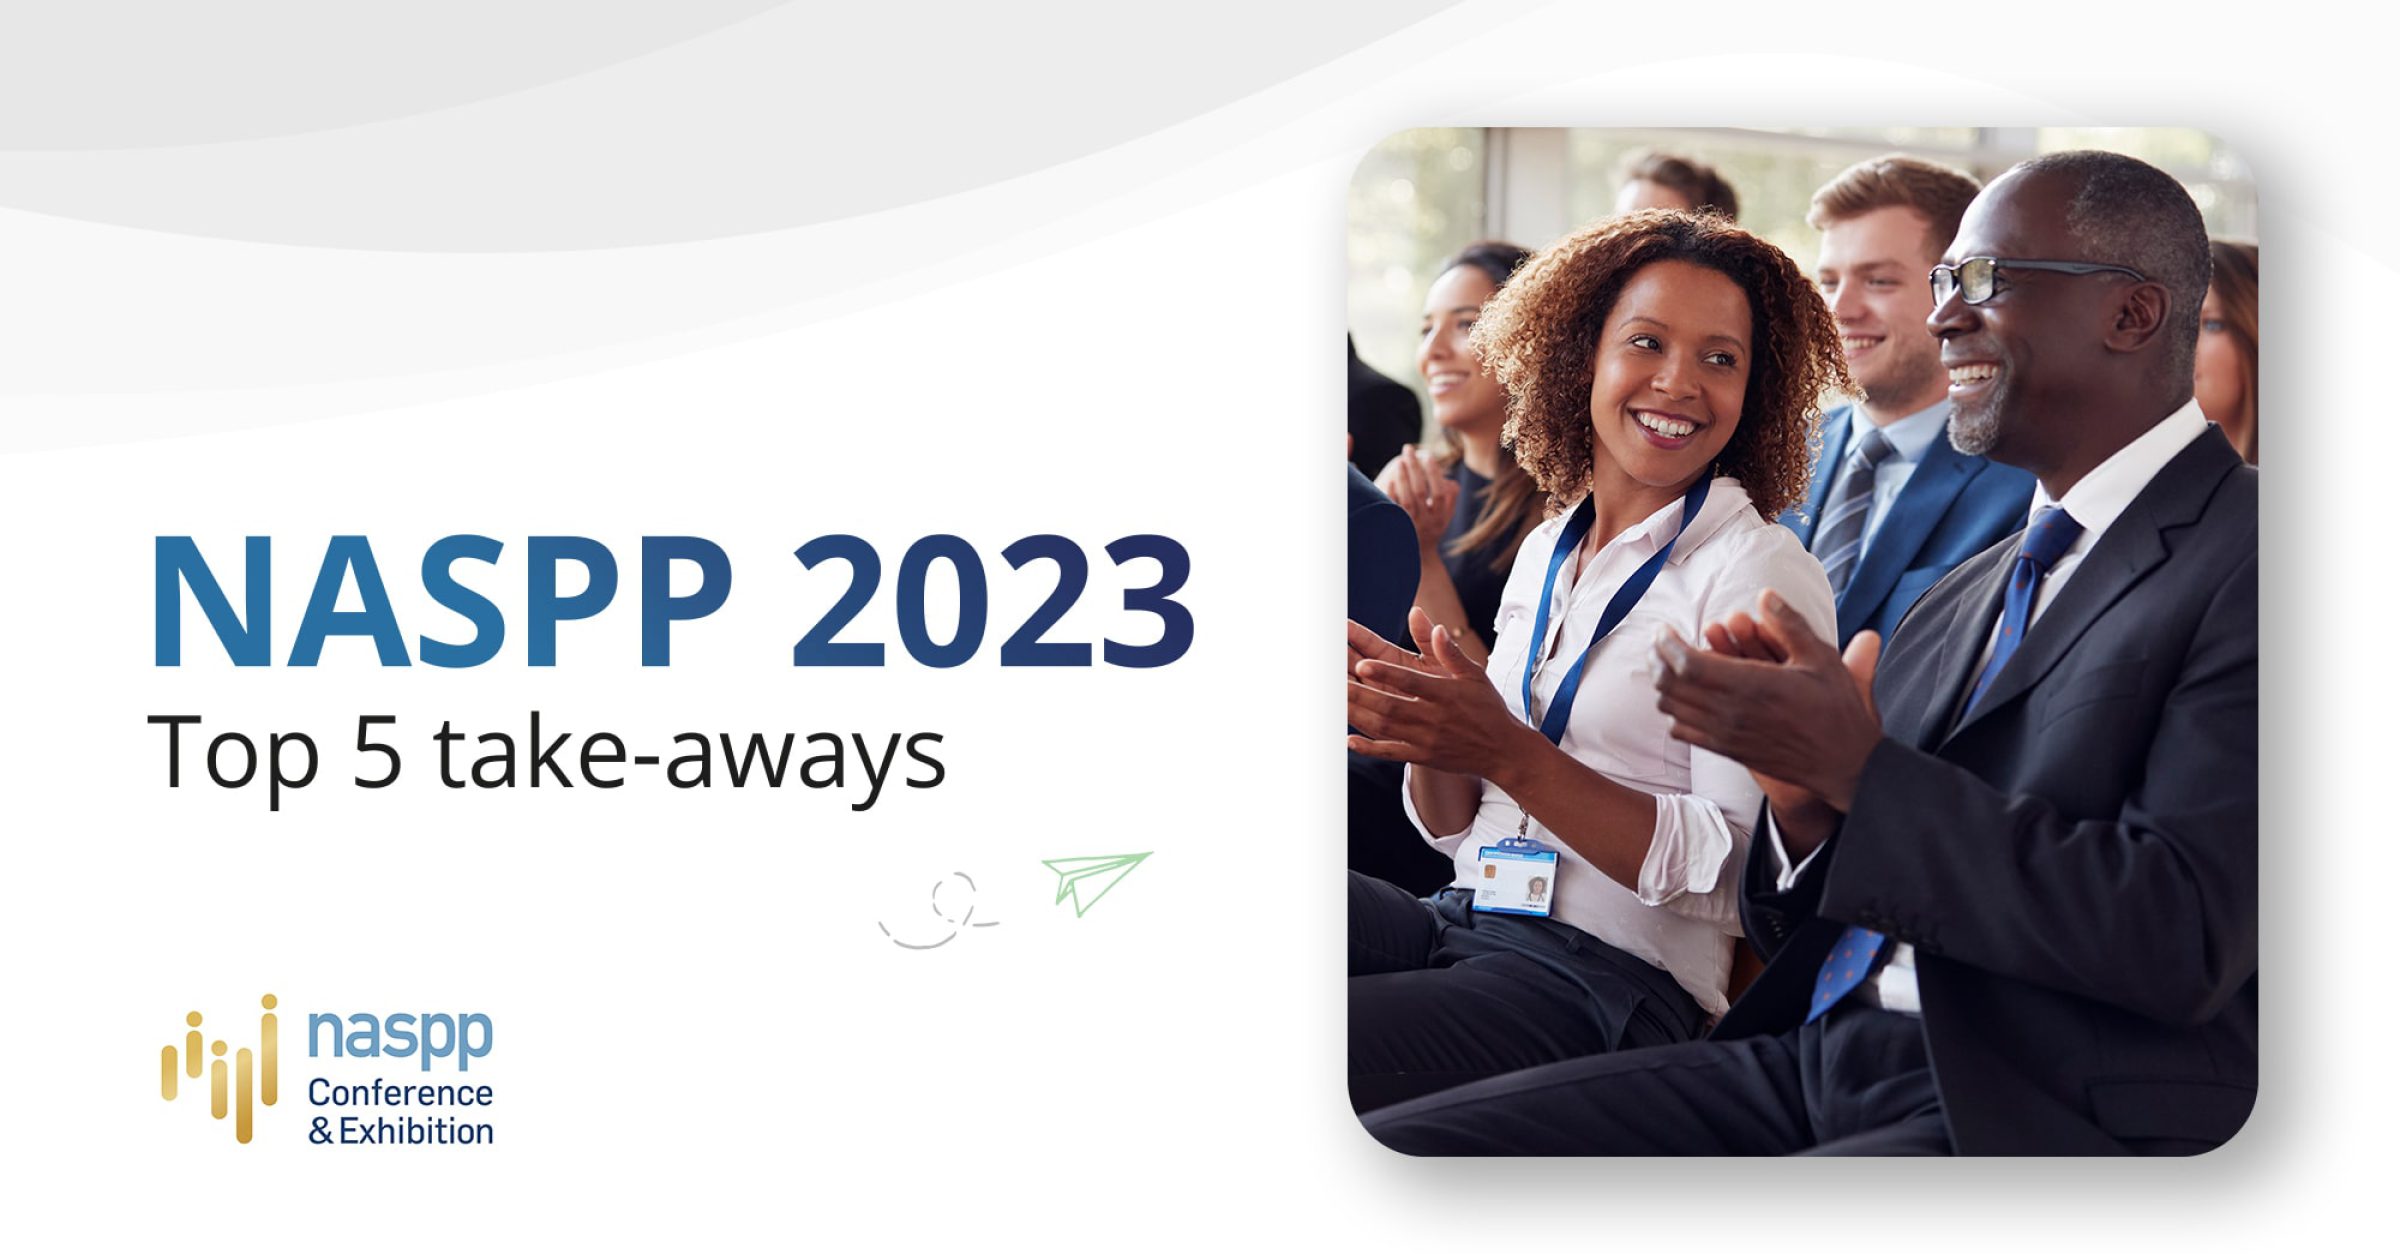 NASPP 2023 Top 5 take-aways (or; Here’s how to convince your boss to let you go to NASPP next year)